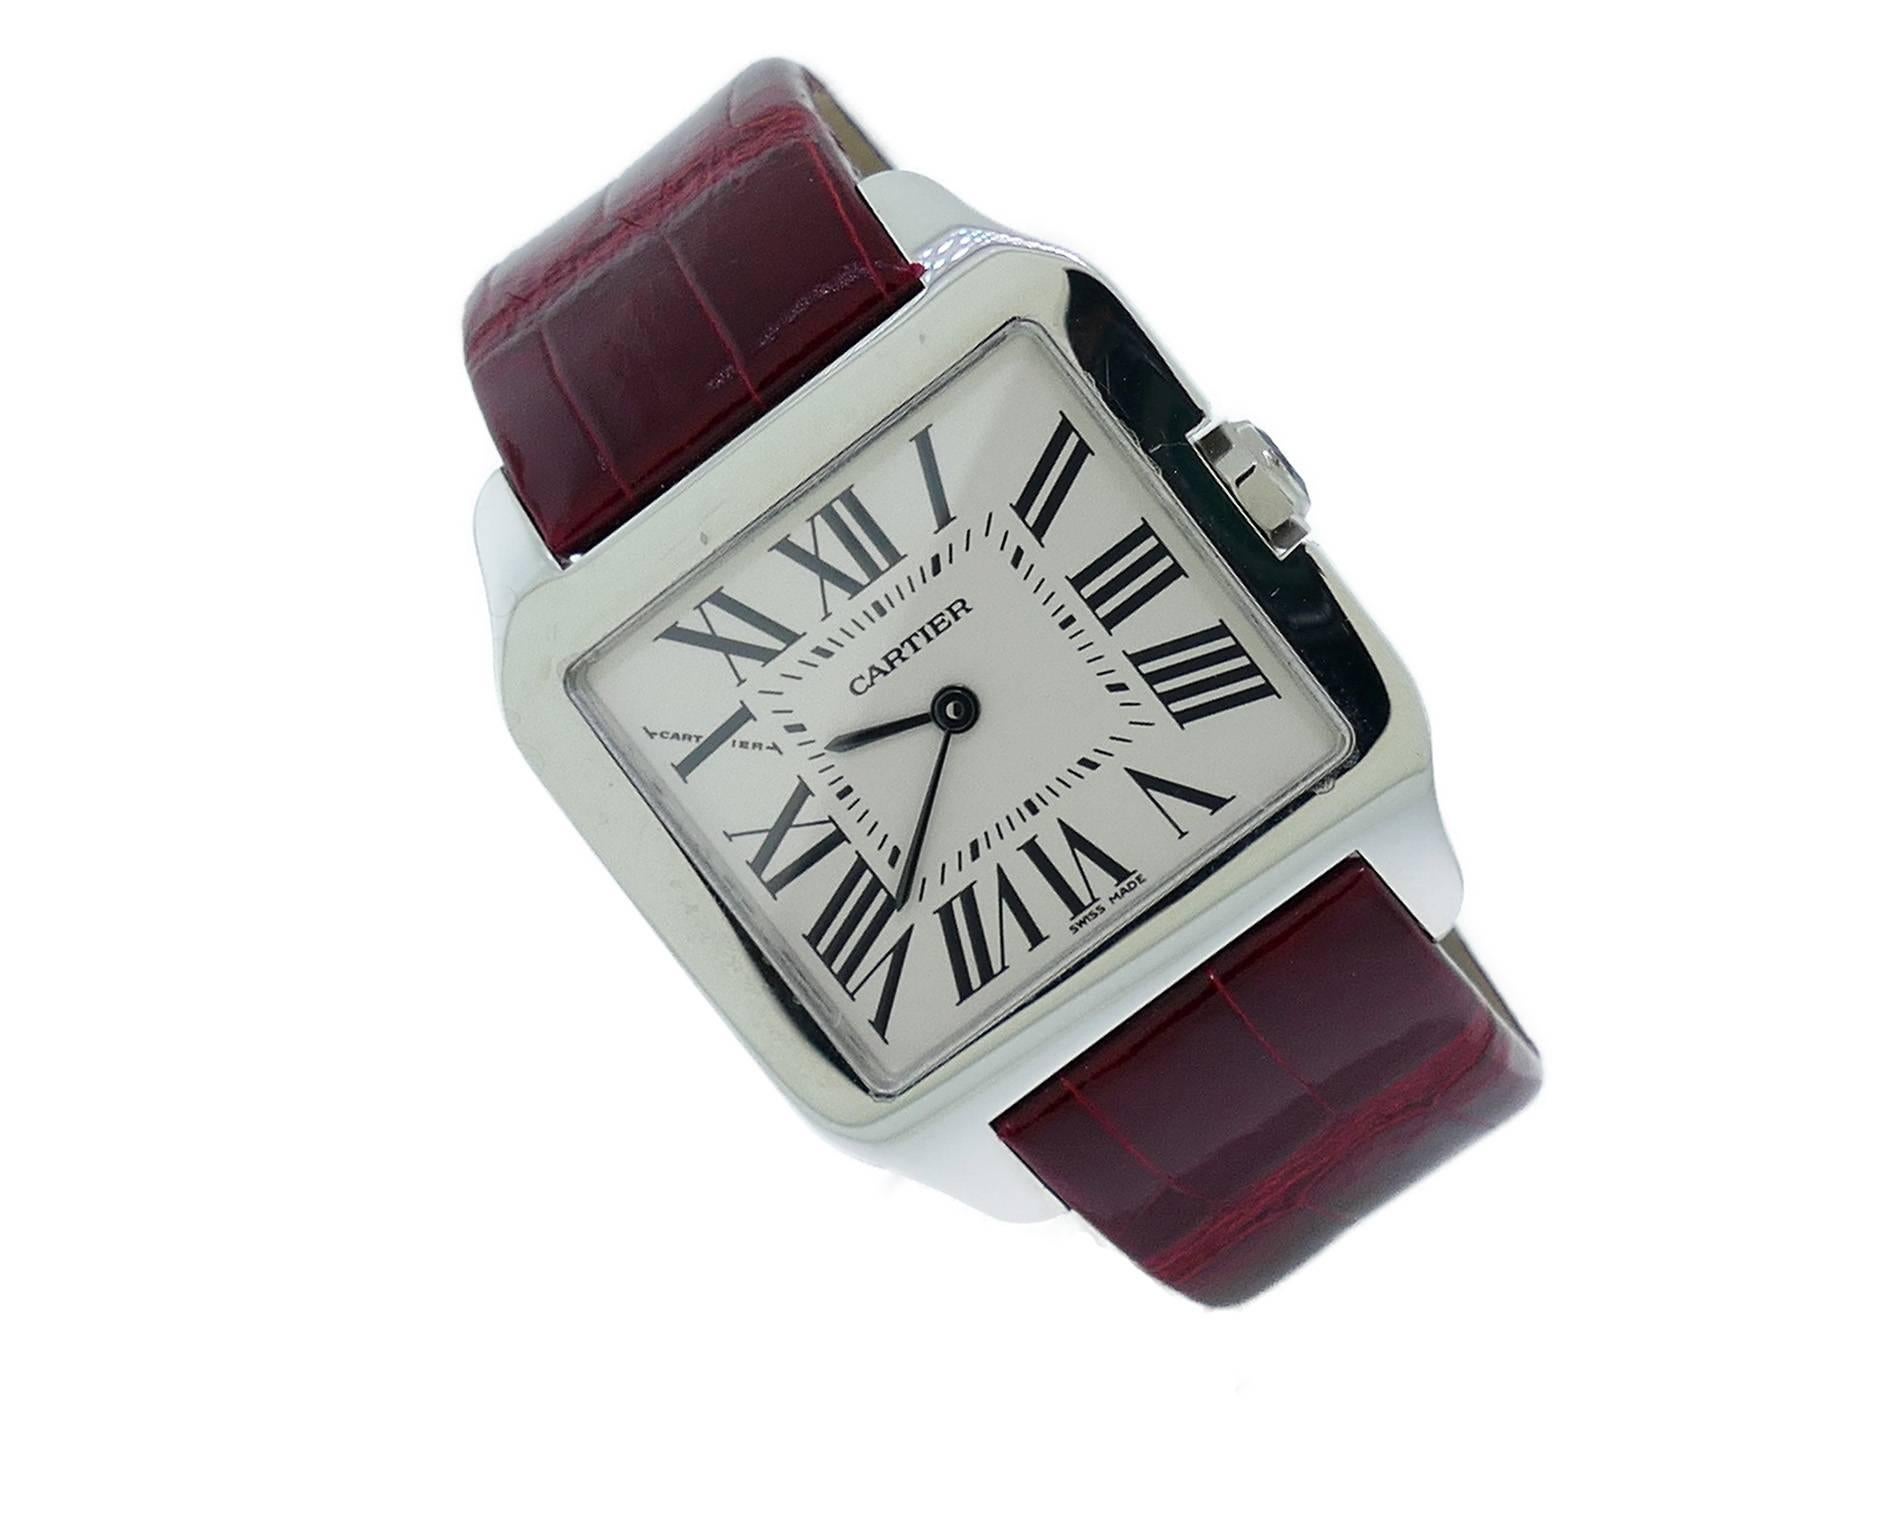 Small (30mm) Cartier Santos Dumont in 18k White Gold On Strap, Ref W2009451, Retails $13,600. The Watch is in Excellent Condition and Keeping Perfect Time, Movement is Battery Operated. The Watch is on Cartier Strap & 18k Deployment Buckle. The